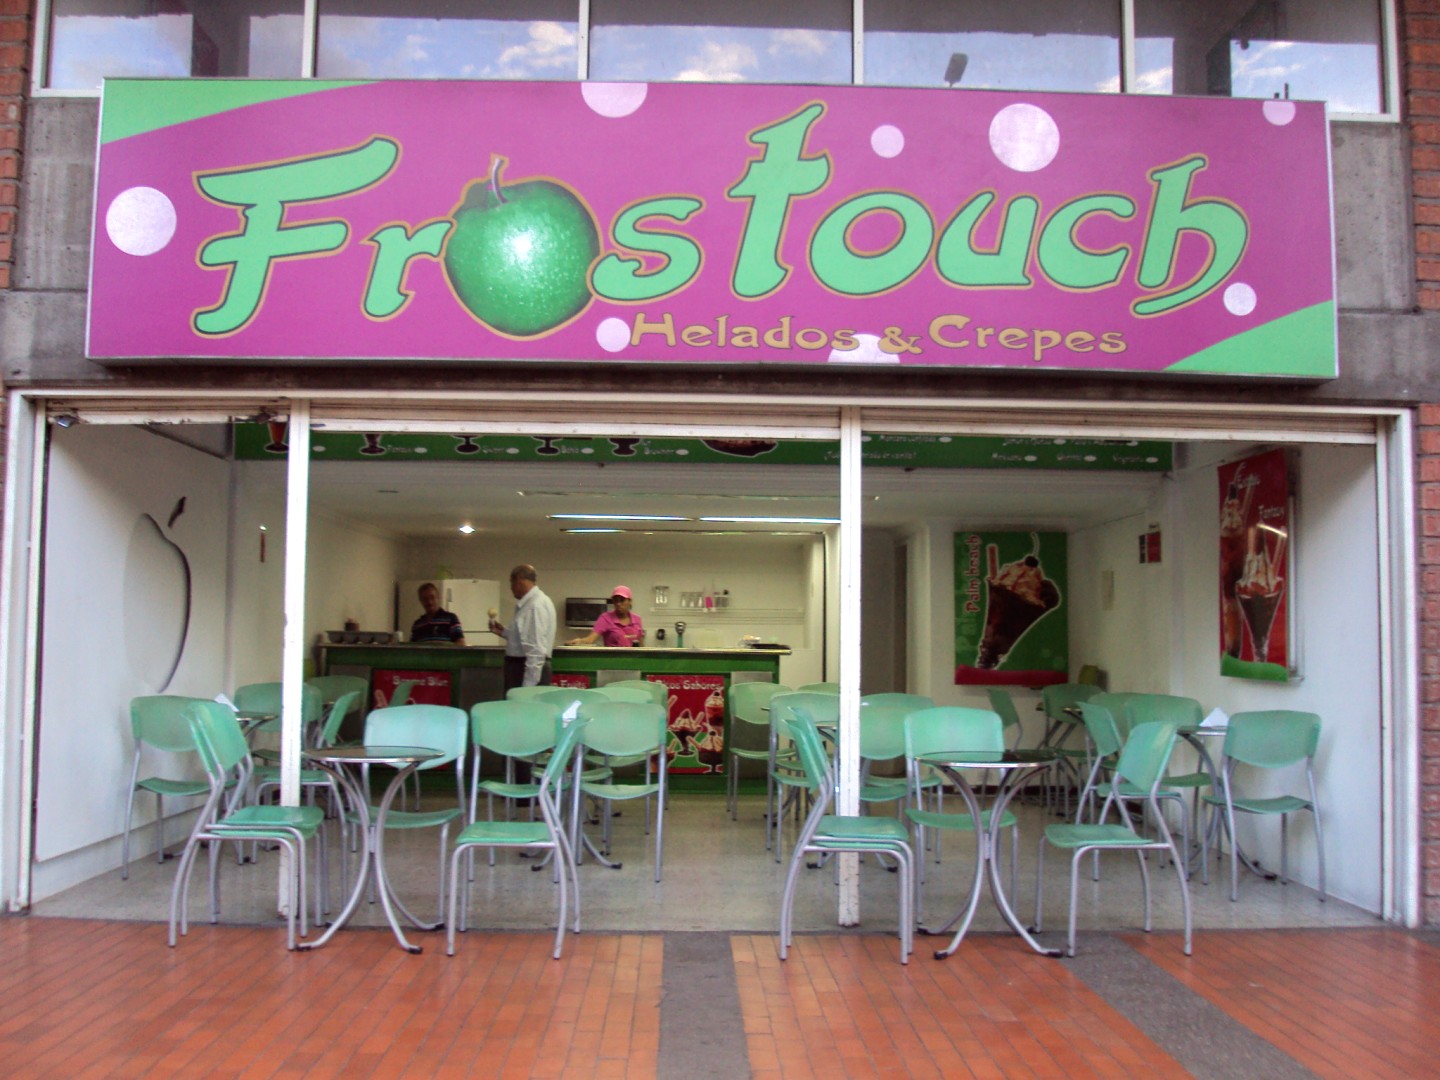 Frostouch